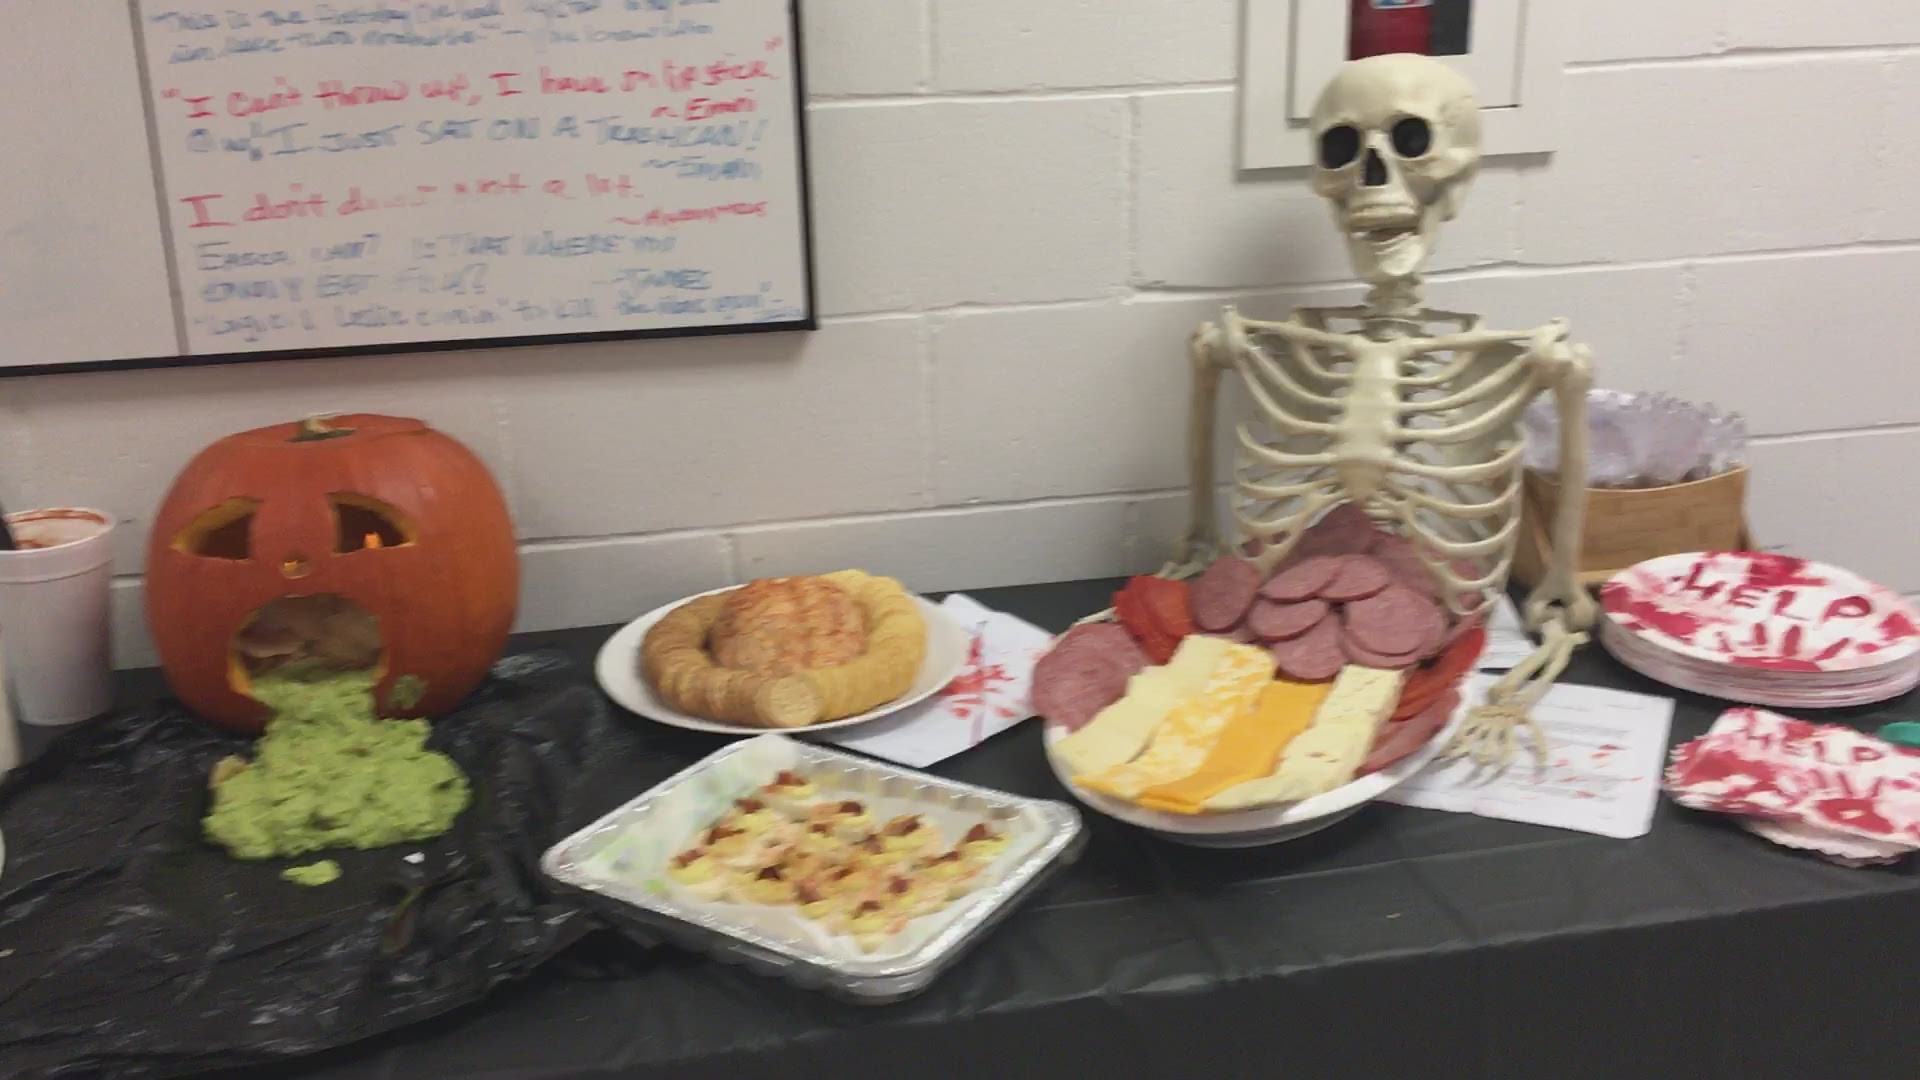 Check out 6 News' creative holiday table for Halloween 2019.